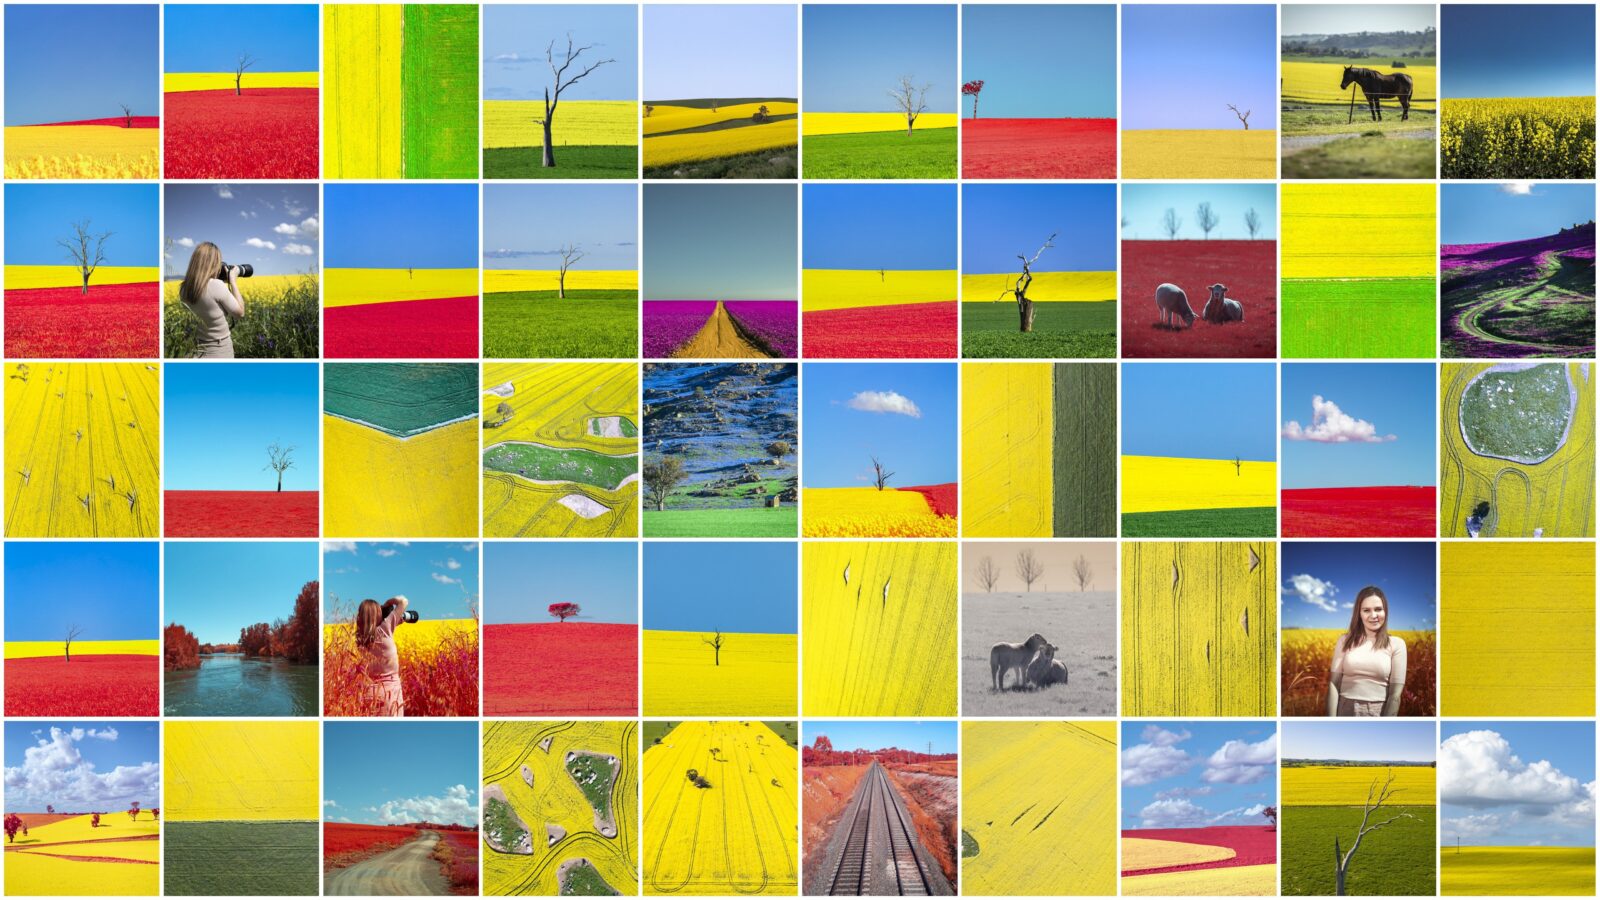 A collage of canola fields photography tour photographs